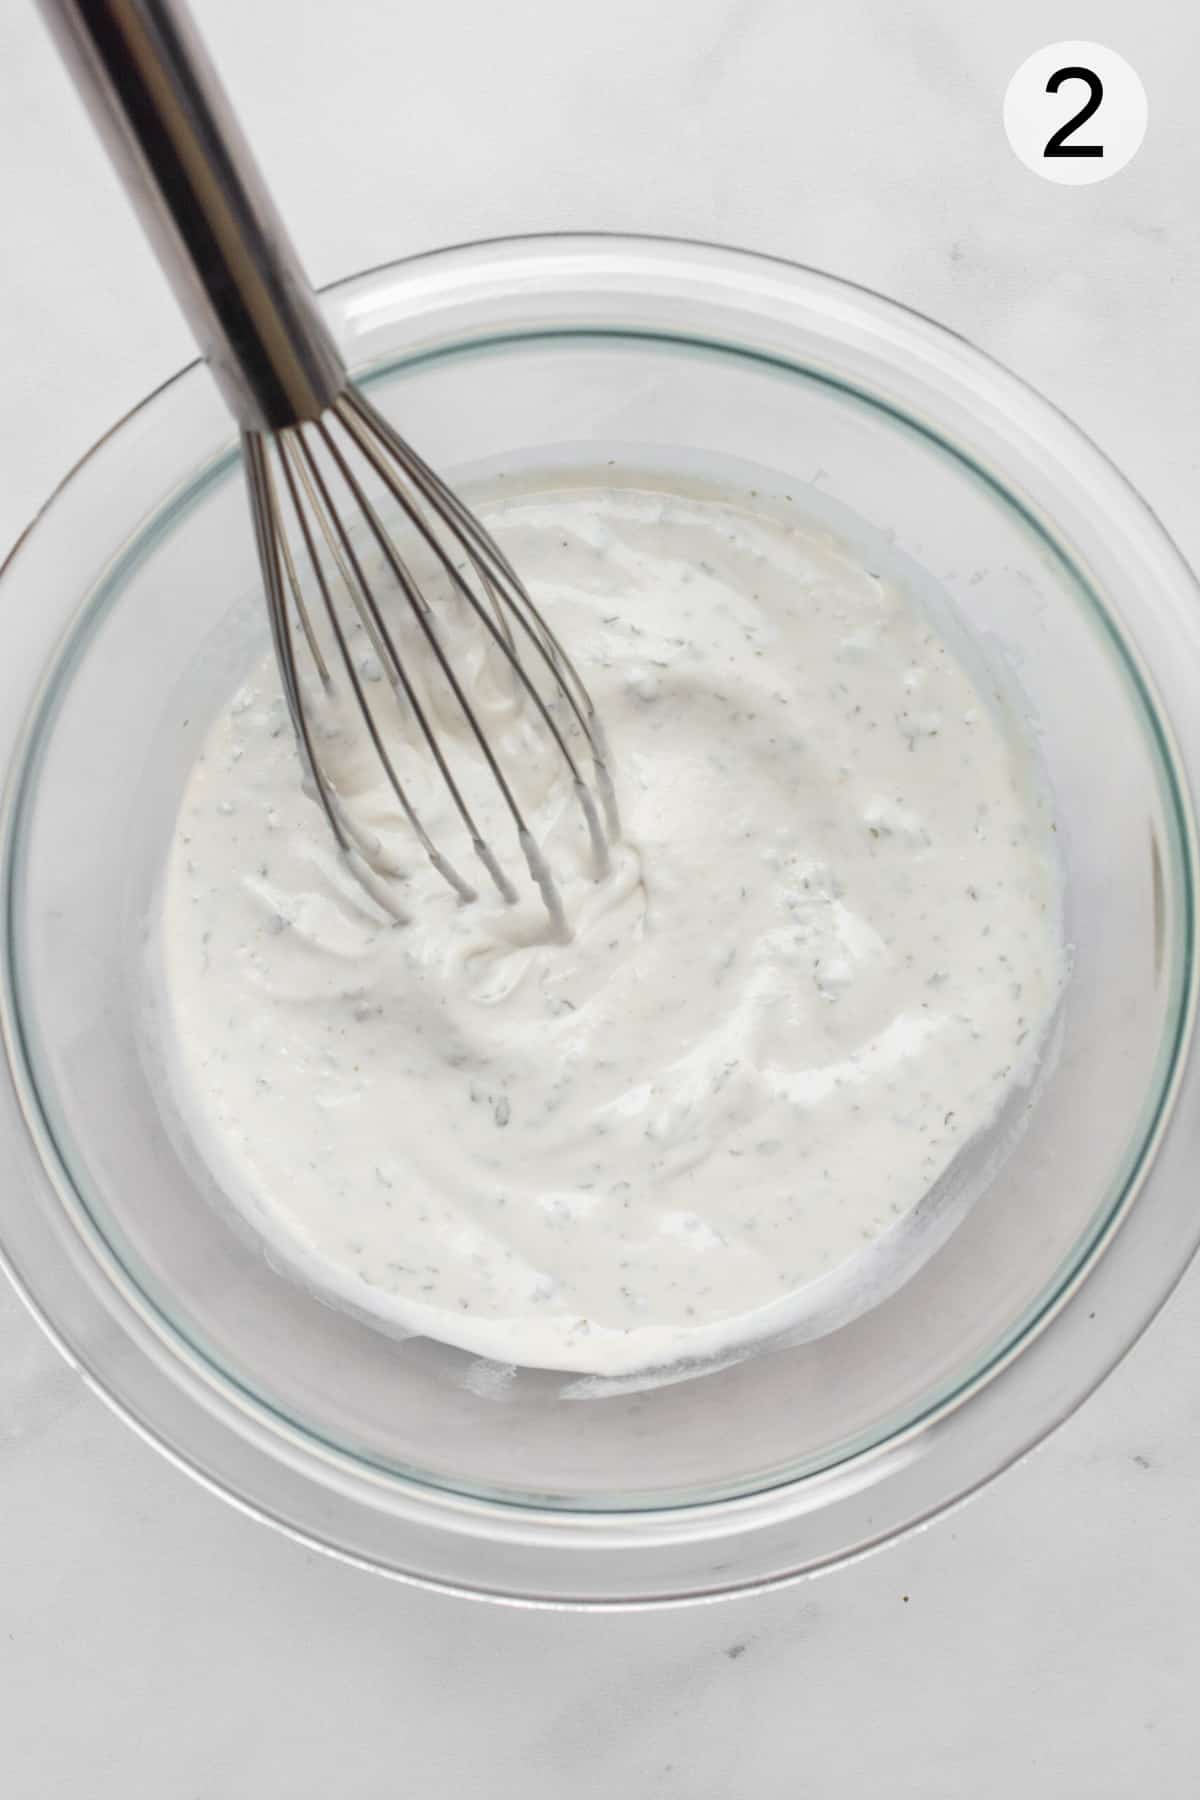 Ranch dip in a glass bowl with a metal whisk.